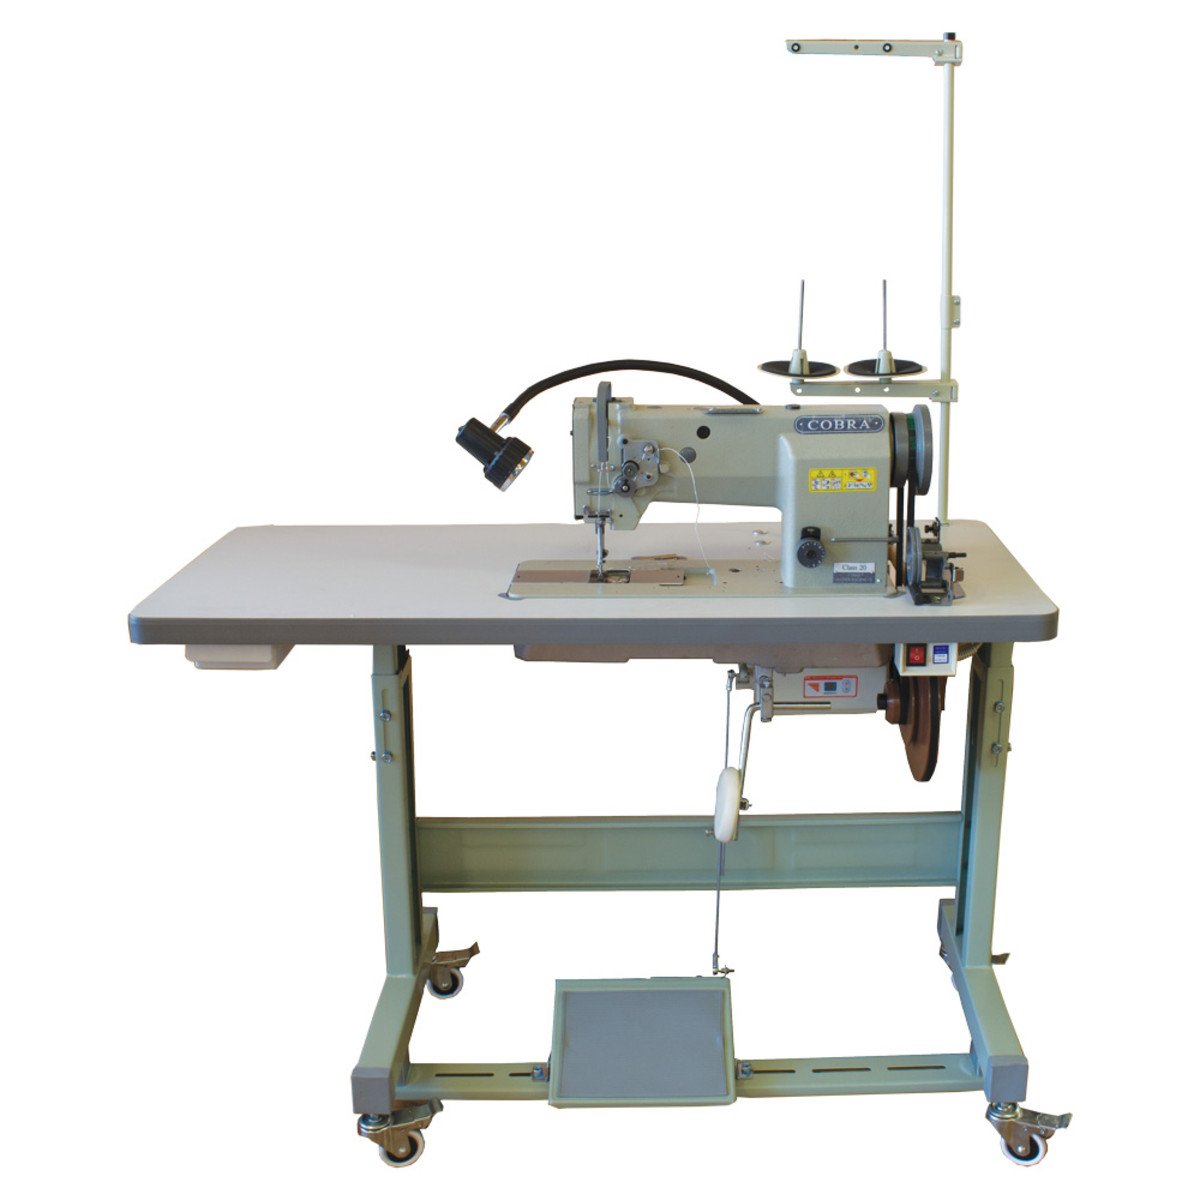 Cobra Class 17 Walking Foot Machine for Upholstery - American Leatherworks